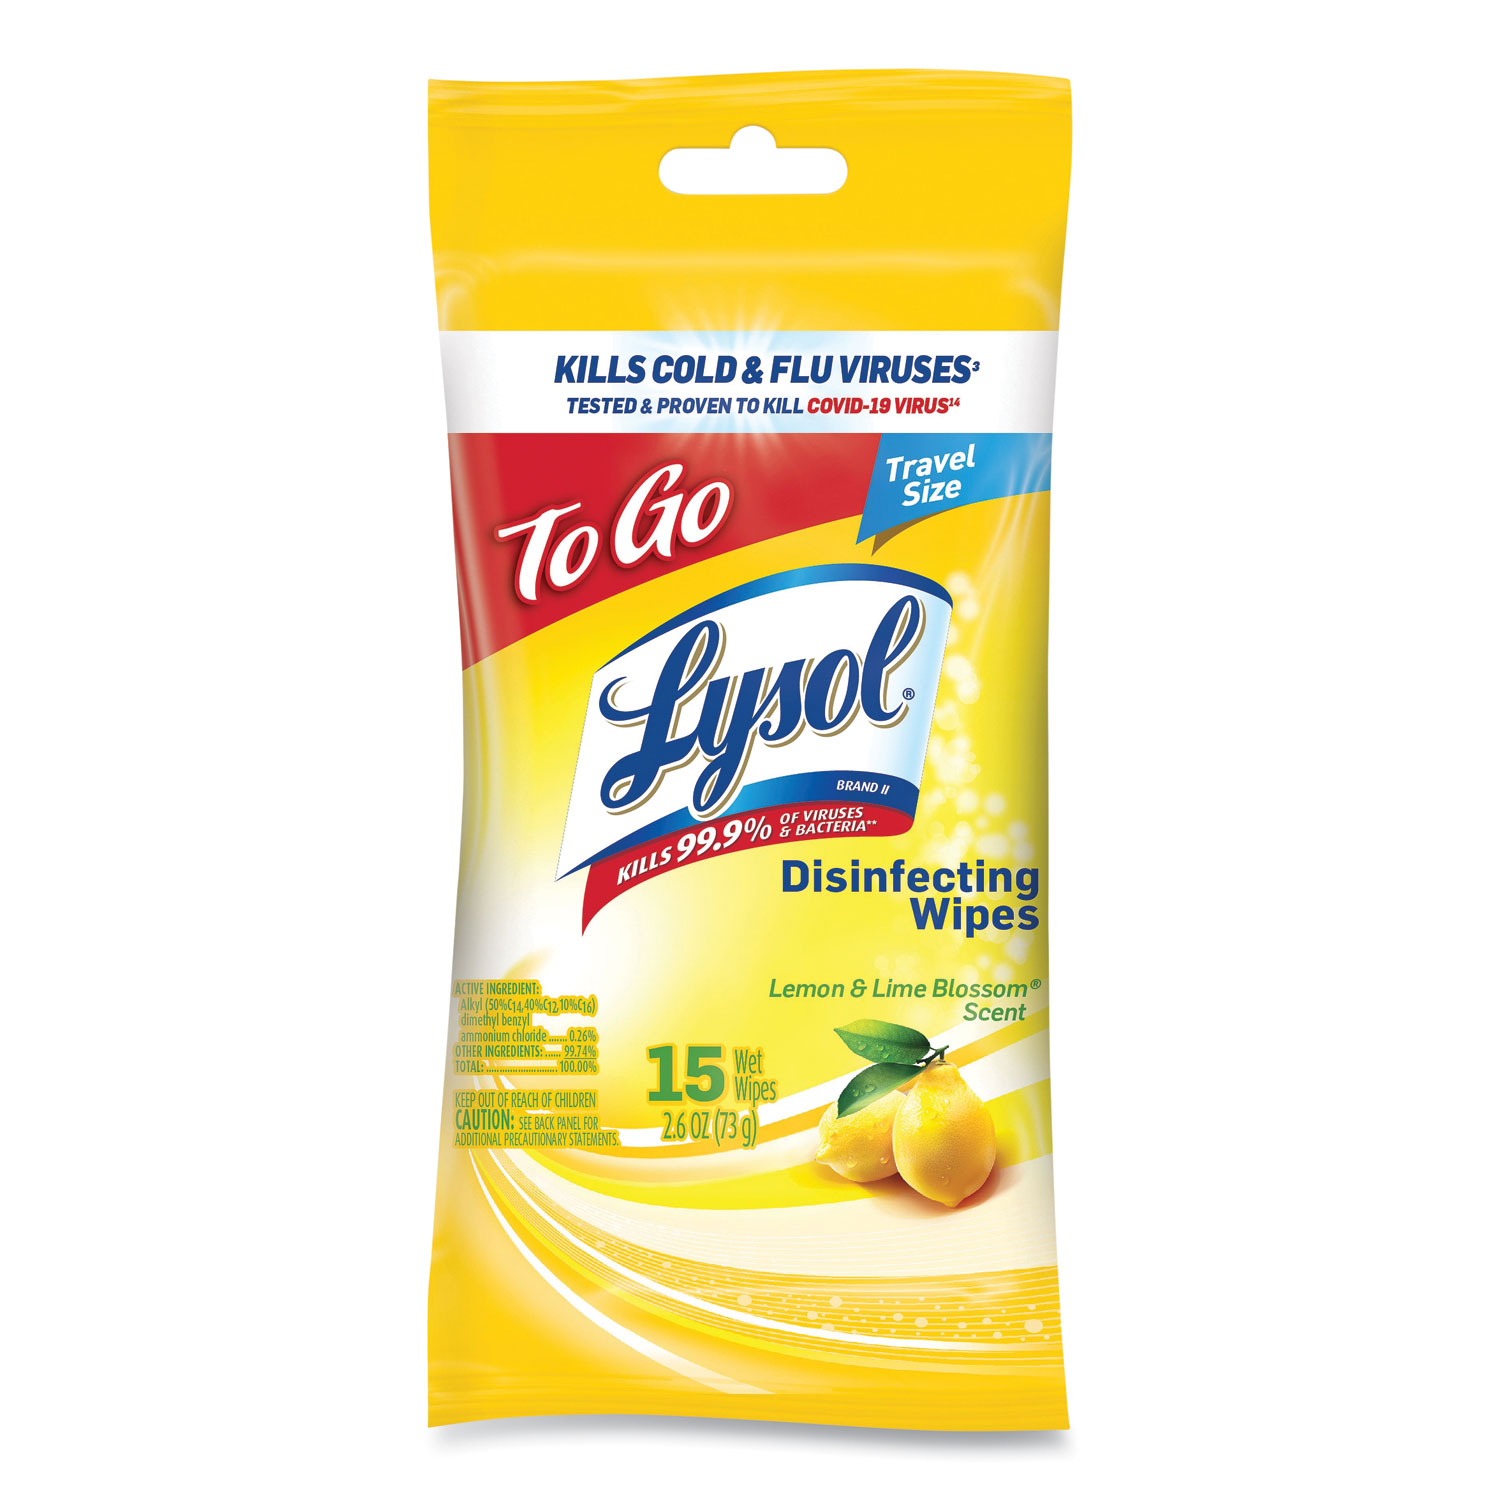 LYSOL® Brand Disinfecting Wipes Flatpacks, 6.29 x 7.87, Lemon and Lime Blossom, 15 Wipes/Flat Pack, 48 Flat Packs/Carton